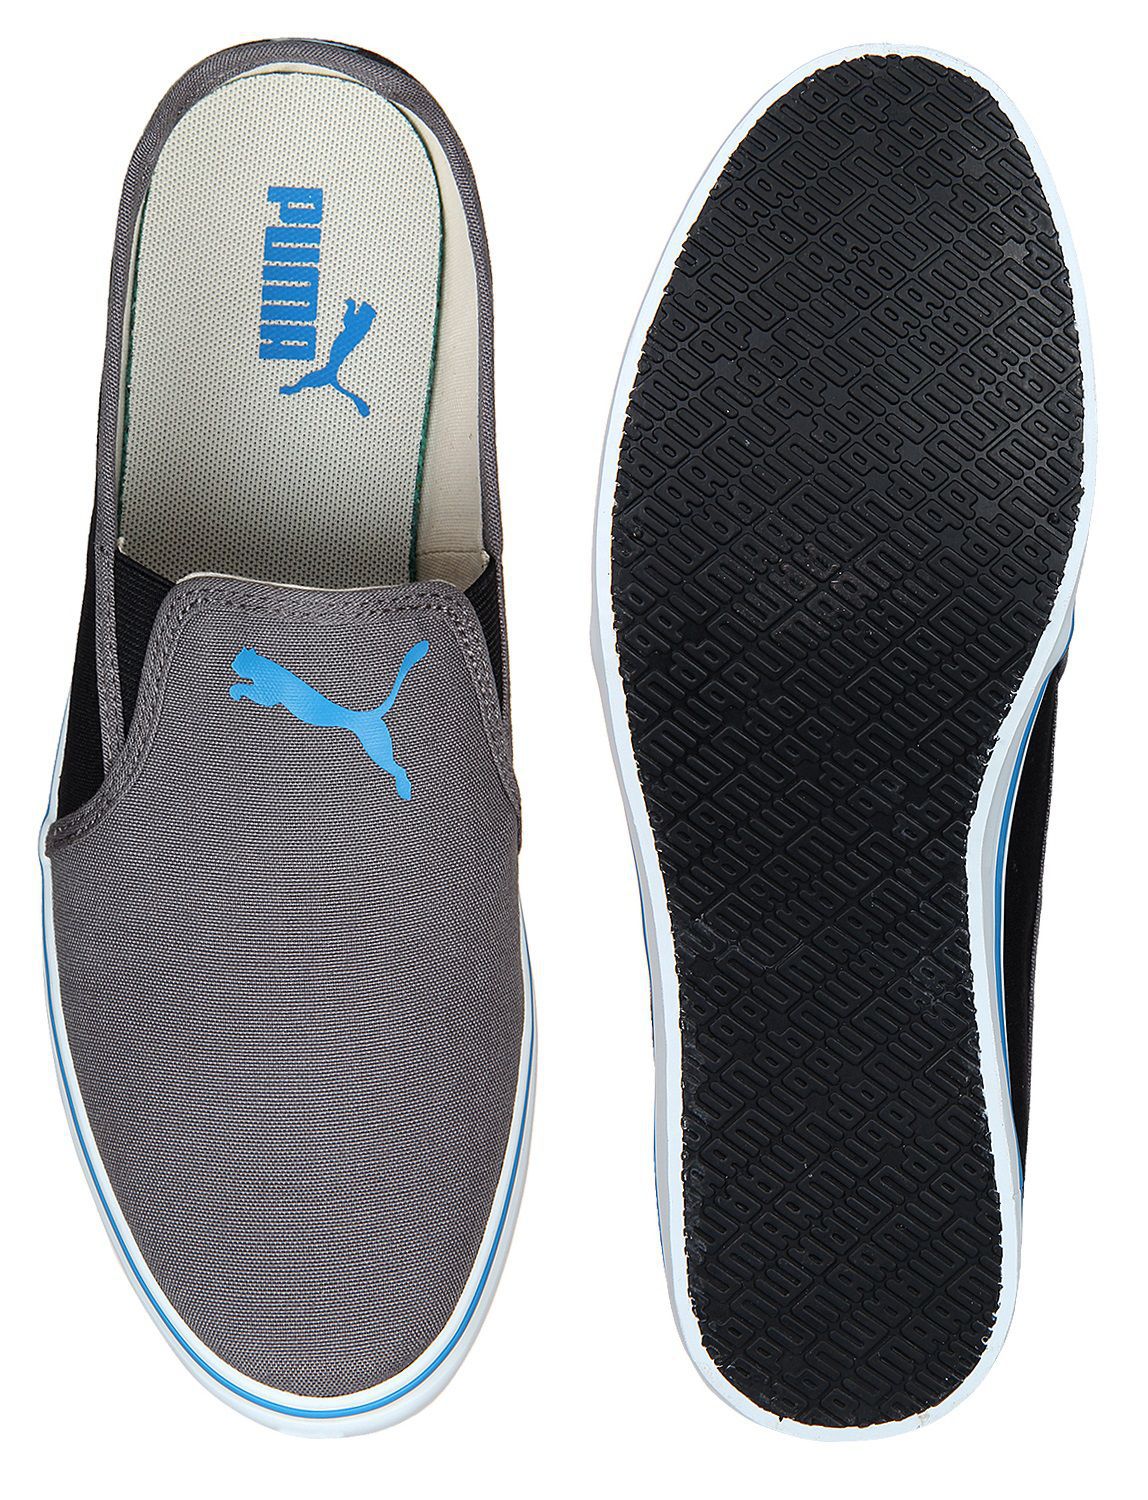 Puma Gray Casual Shoes - Buy Puma Gray Casual Shoes Online at Best ...